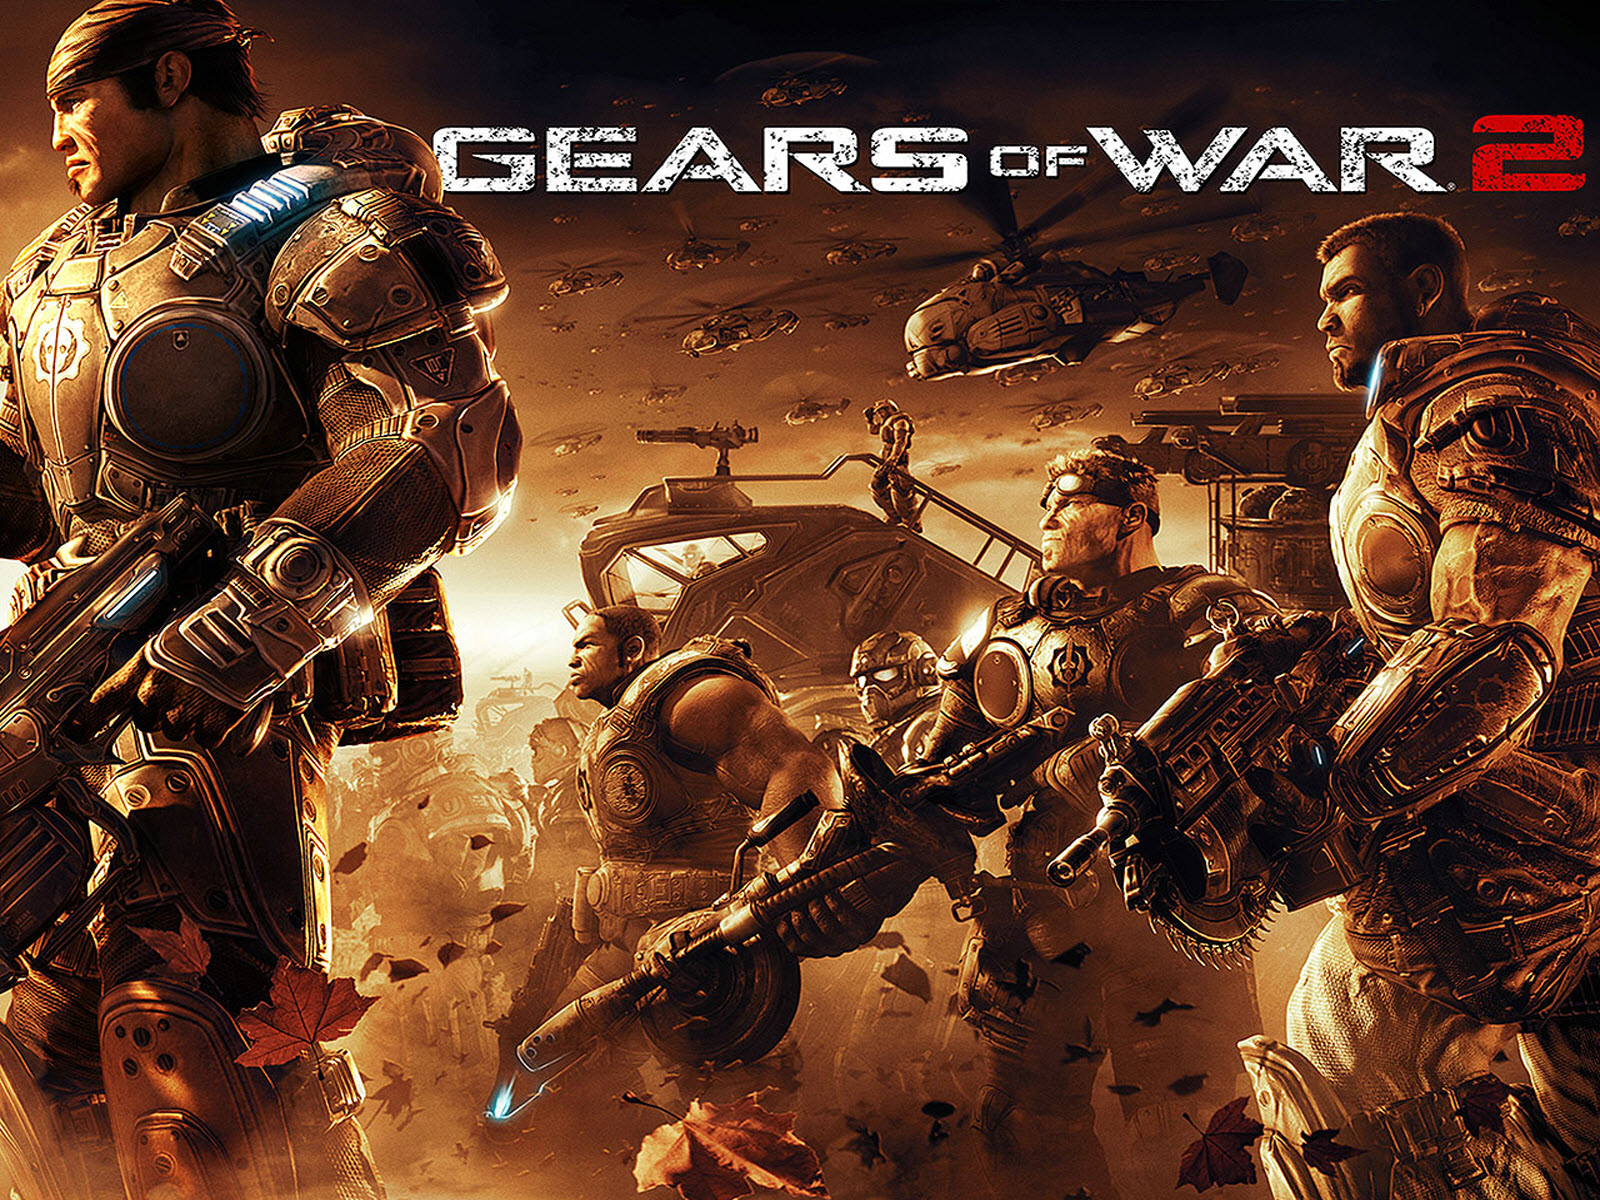 Gears Of War HD 1080p Wallpaper And Place Them On Your Desktop